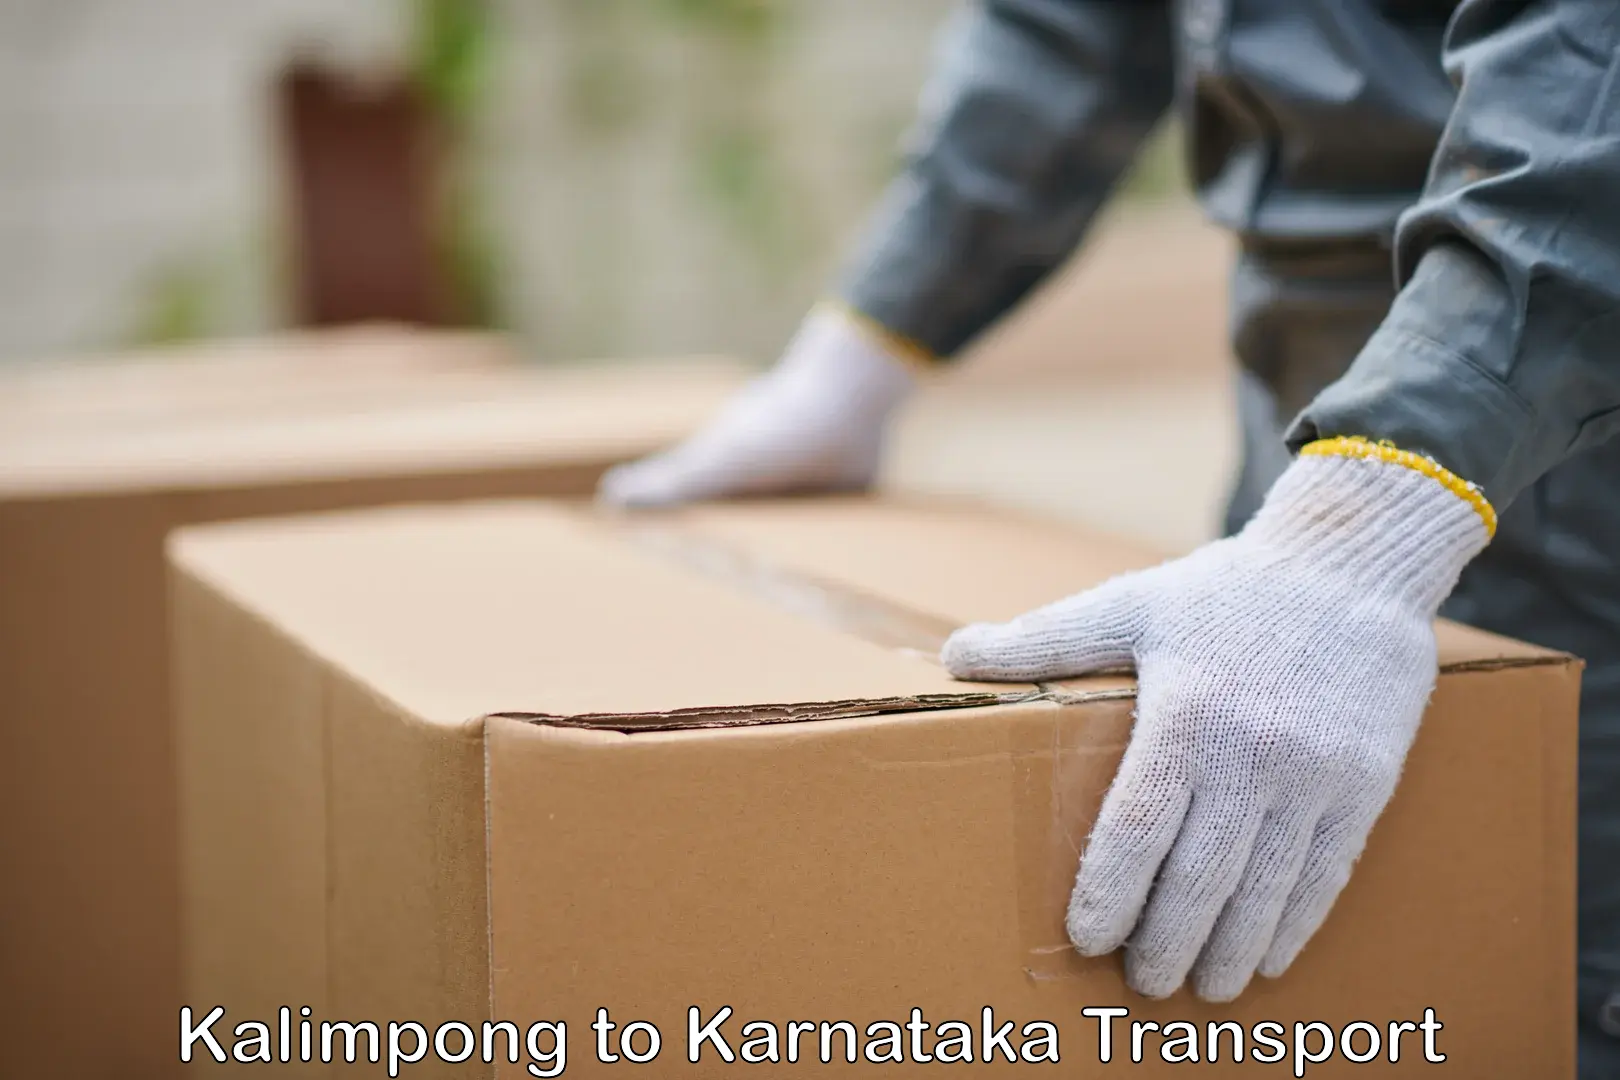 Truck transport companies in India Kalimpong to Manipal Academy of Higher Education